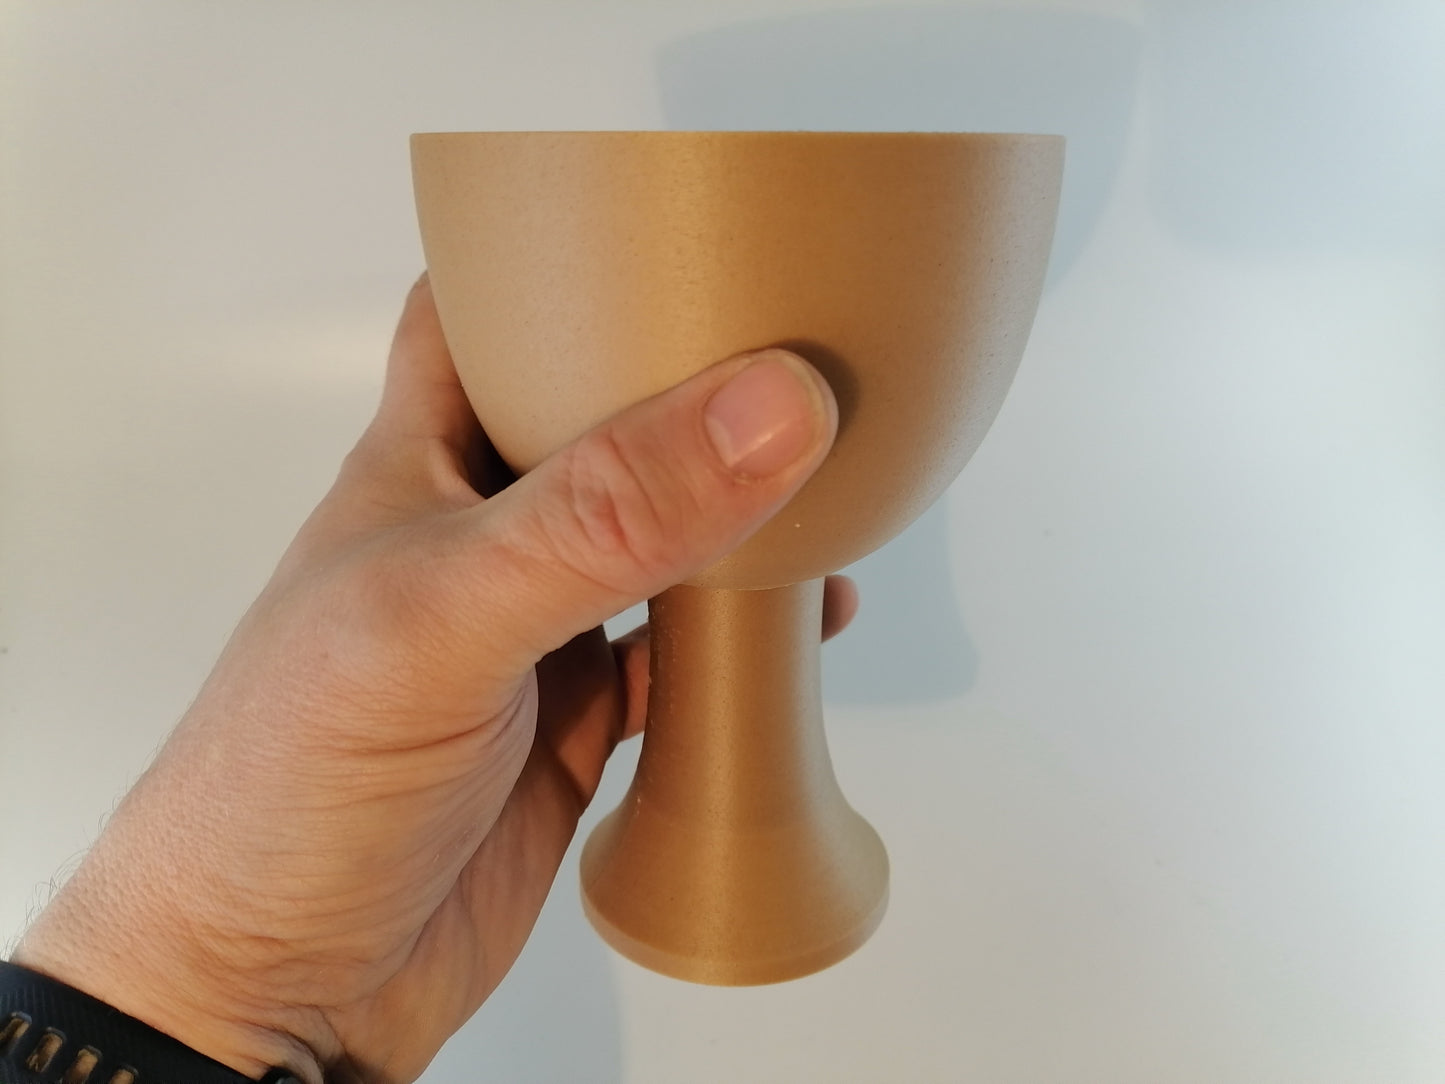 THE HOLY GRAIL - Museum Artifact - 3D Printed Replica